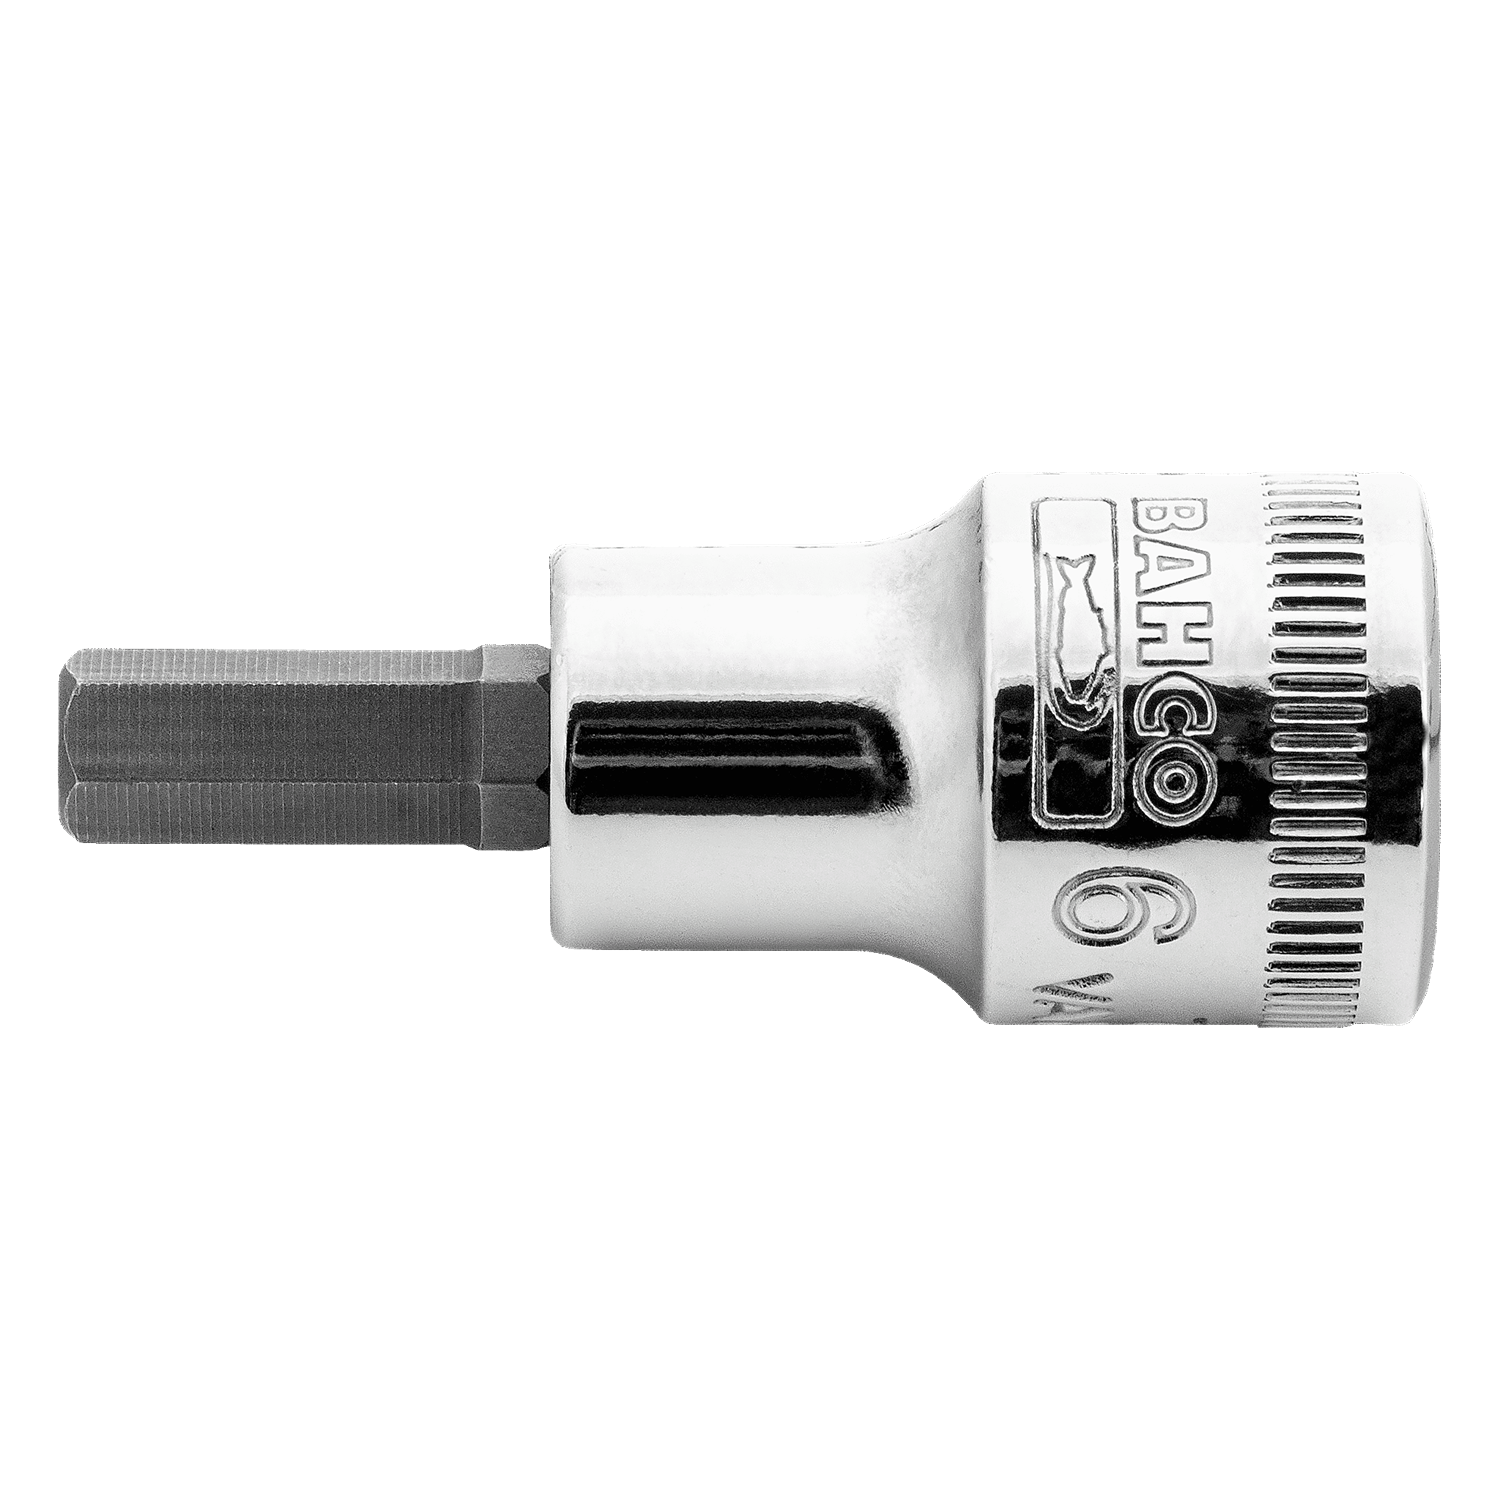 BAHCO 7409M 3/8" Screwdriver Socket Square Hex Head (BAHCO Tools) - Premium Screwdriver Socket from BAHCO - Shop now at Yew Aik.